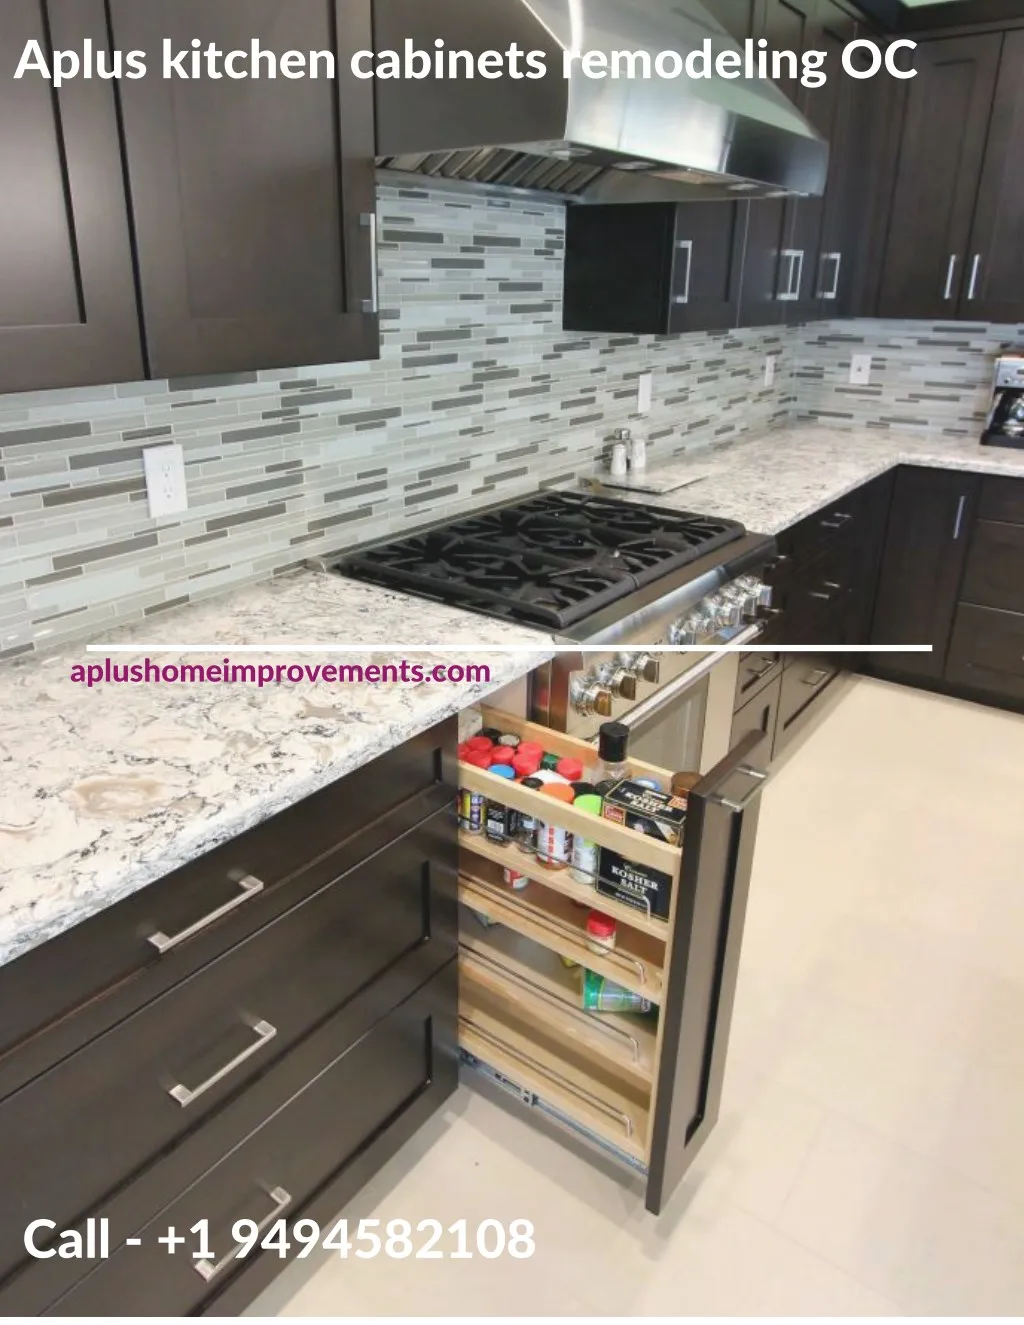 aplus kitchen cabinets remodeling oc